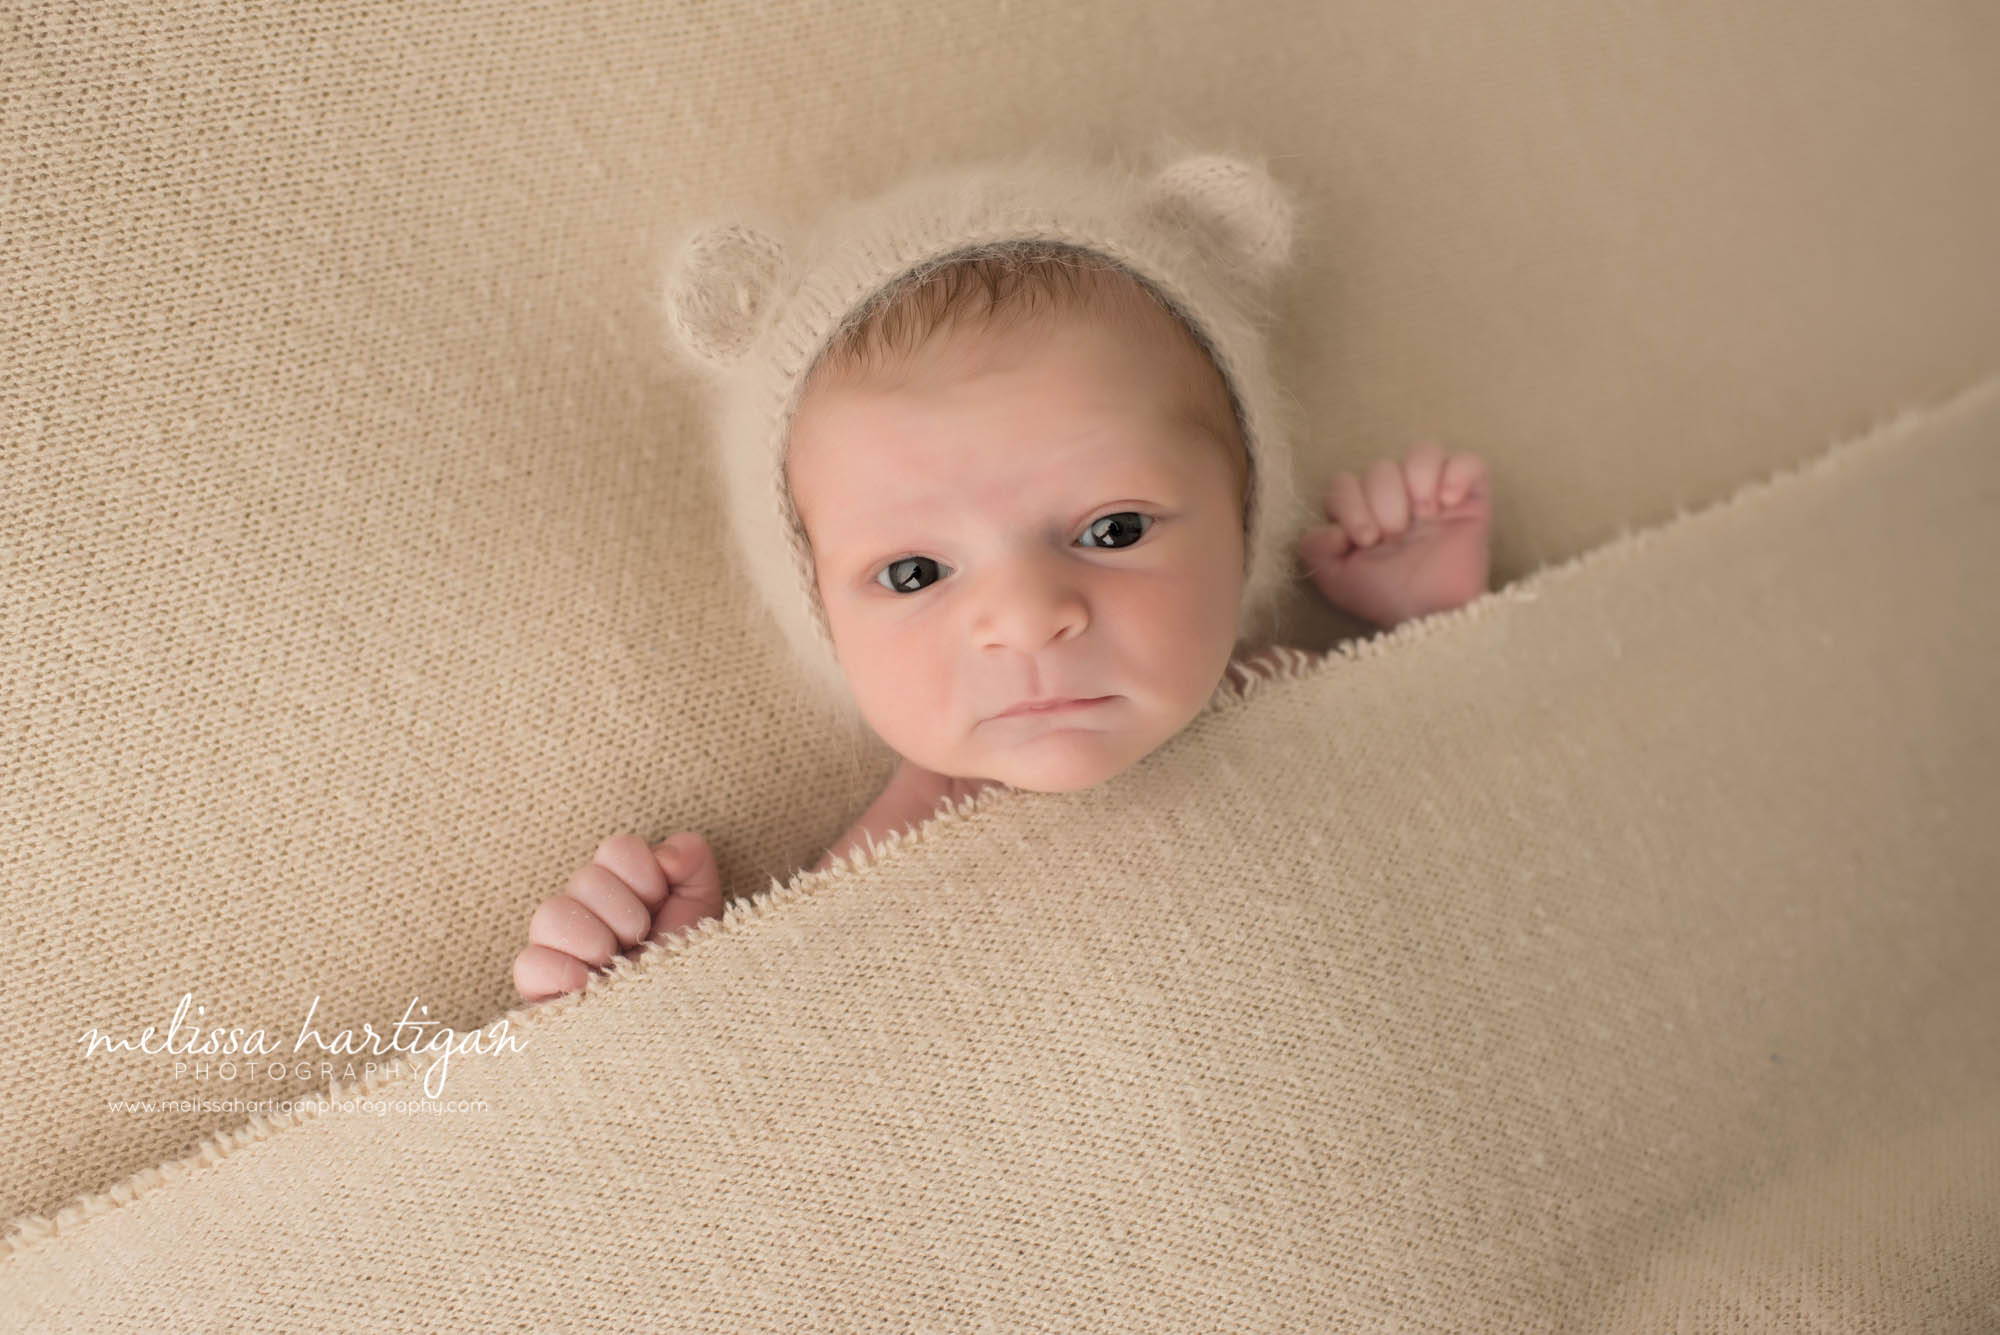 Melissa Hartigan Photography Newborn Photographer Connecticut baby boy wearing knit hat with ears laying under a tan knit blanket awake